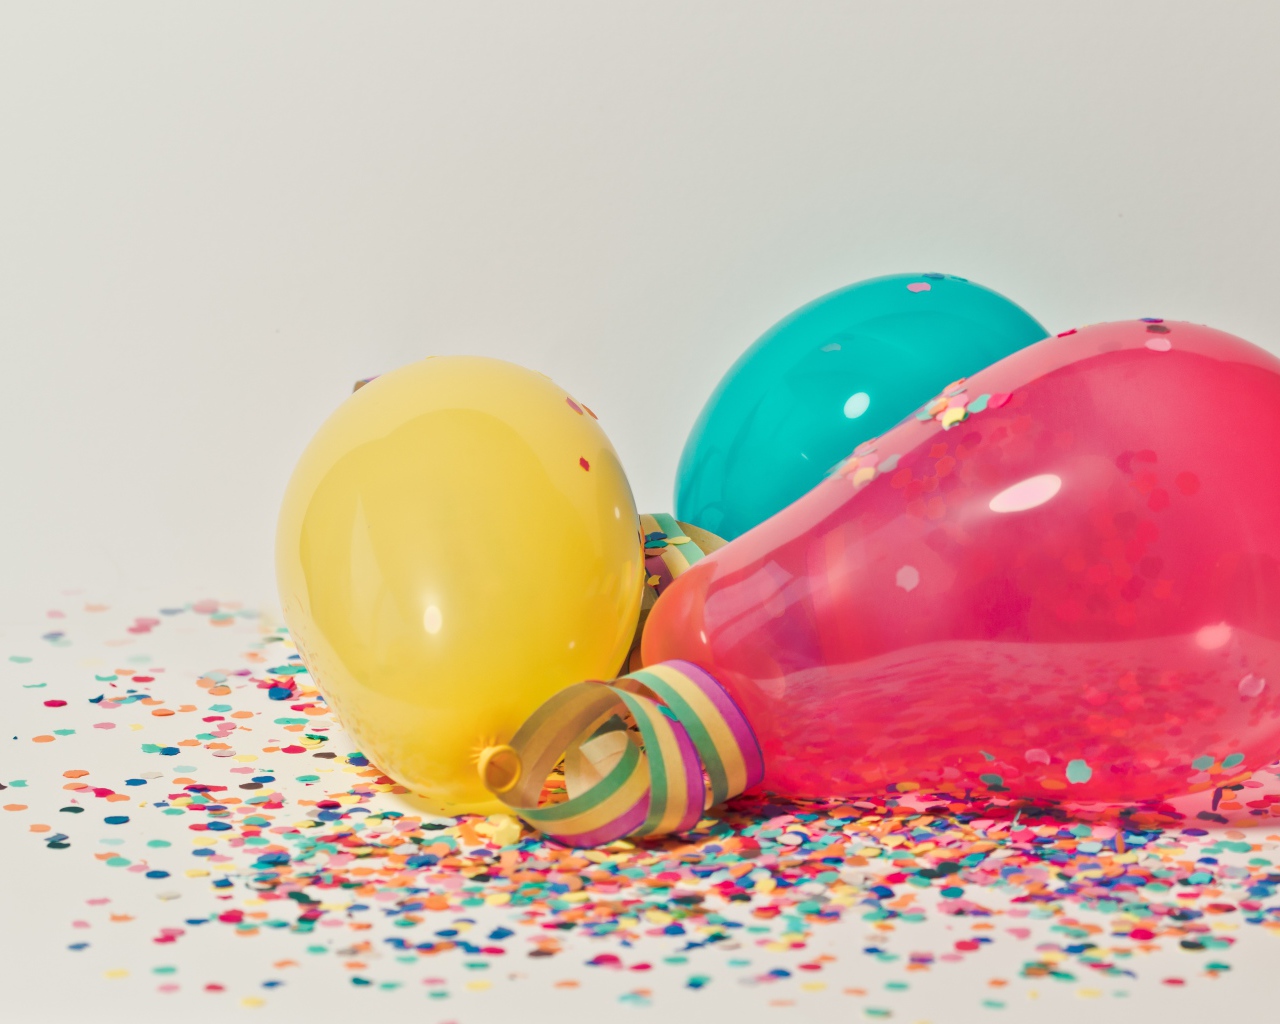 Balloons with confetti on gray background